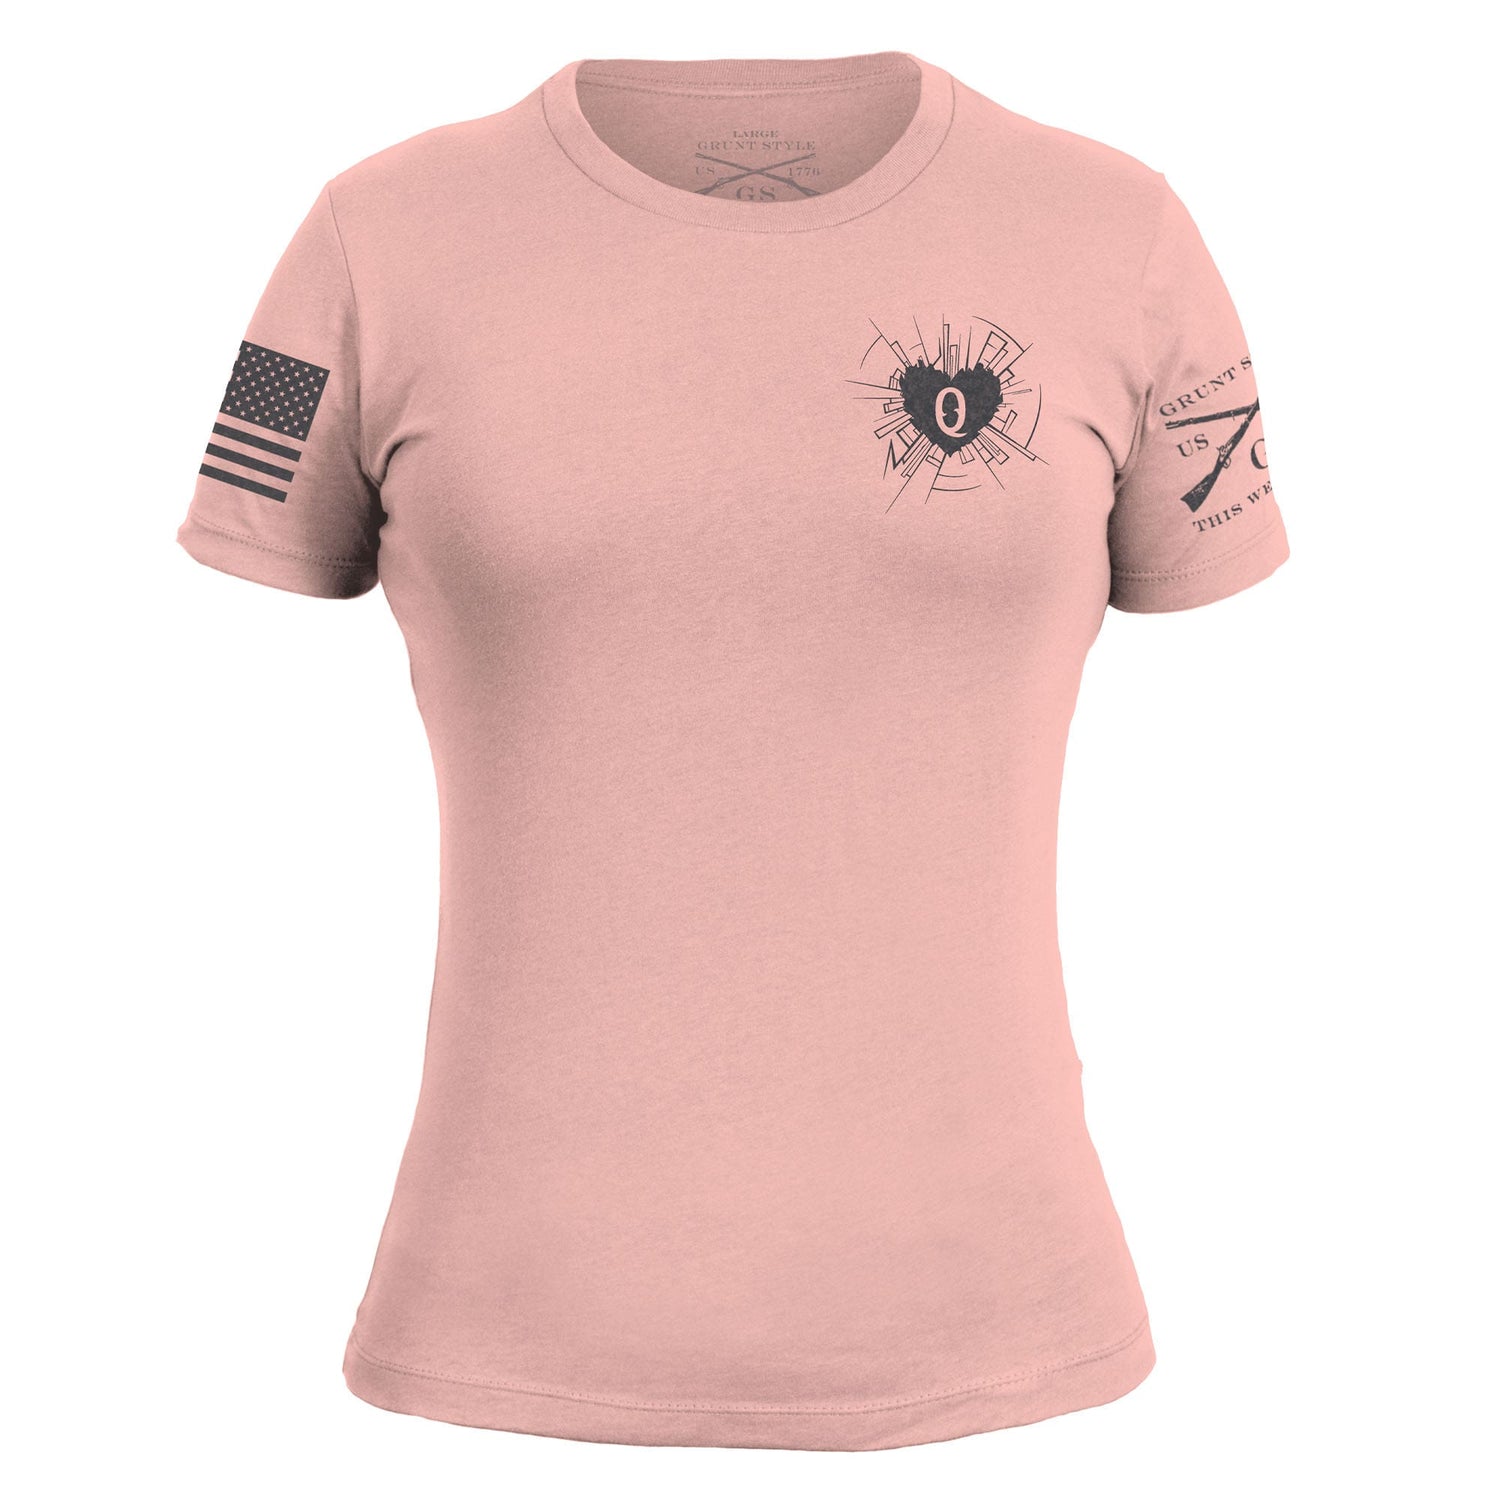 Shirt for Women Heart and Soul of a Warrior - Desert Pink | Grunt Style 